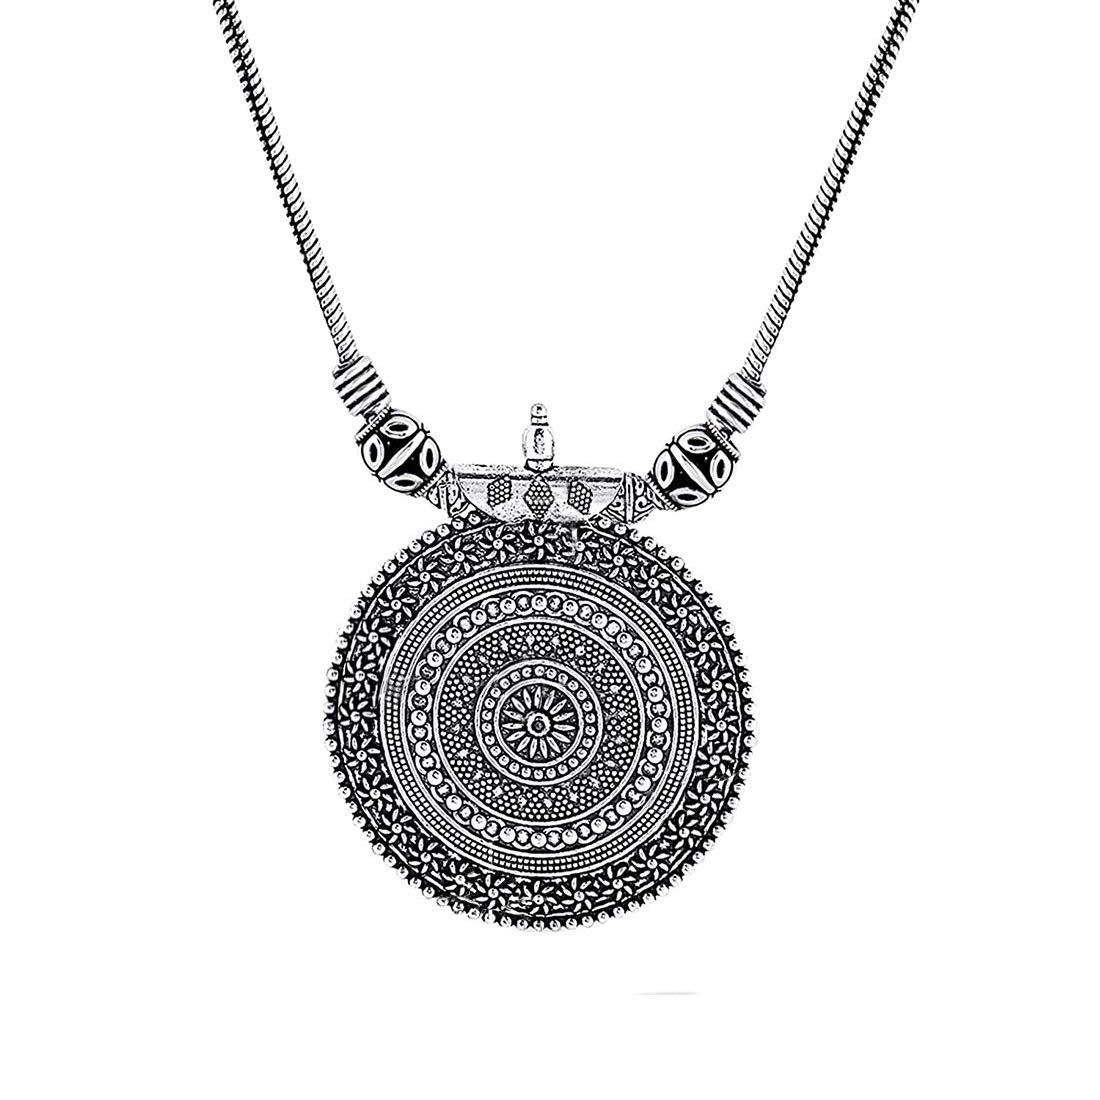 Yellow Chimes Oxidised Pendant Necklace for Women Traditional Artistic Antique Silver Oxidized Pendant Necklace Women and Girls.